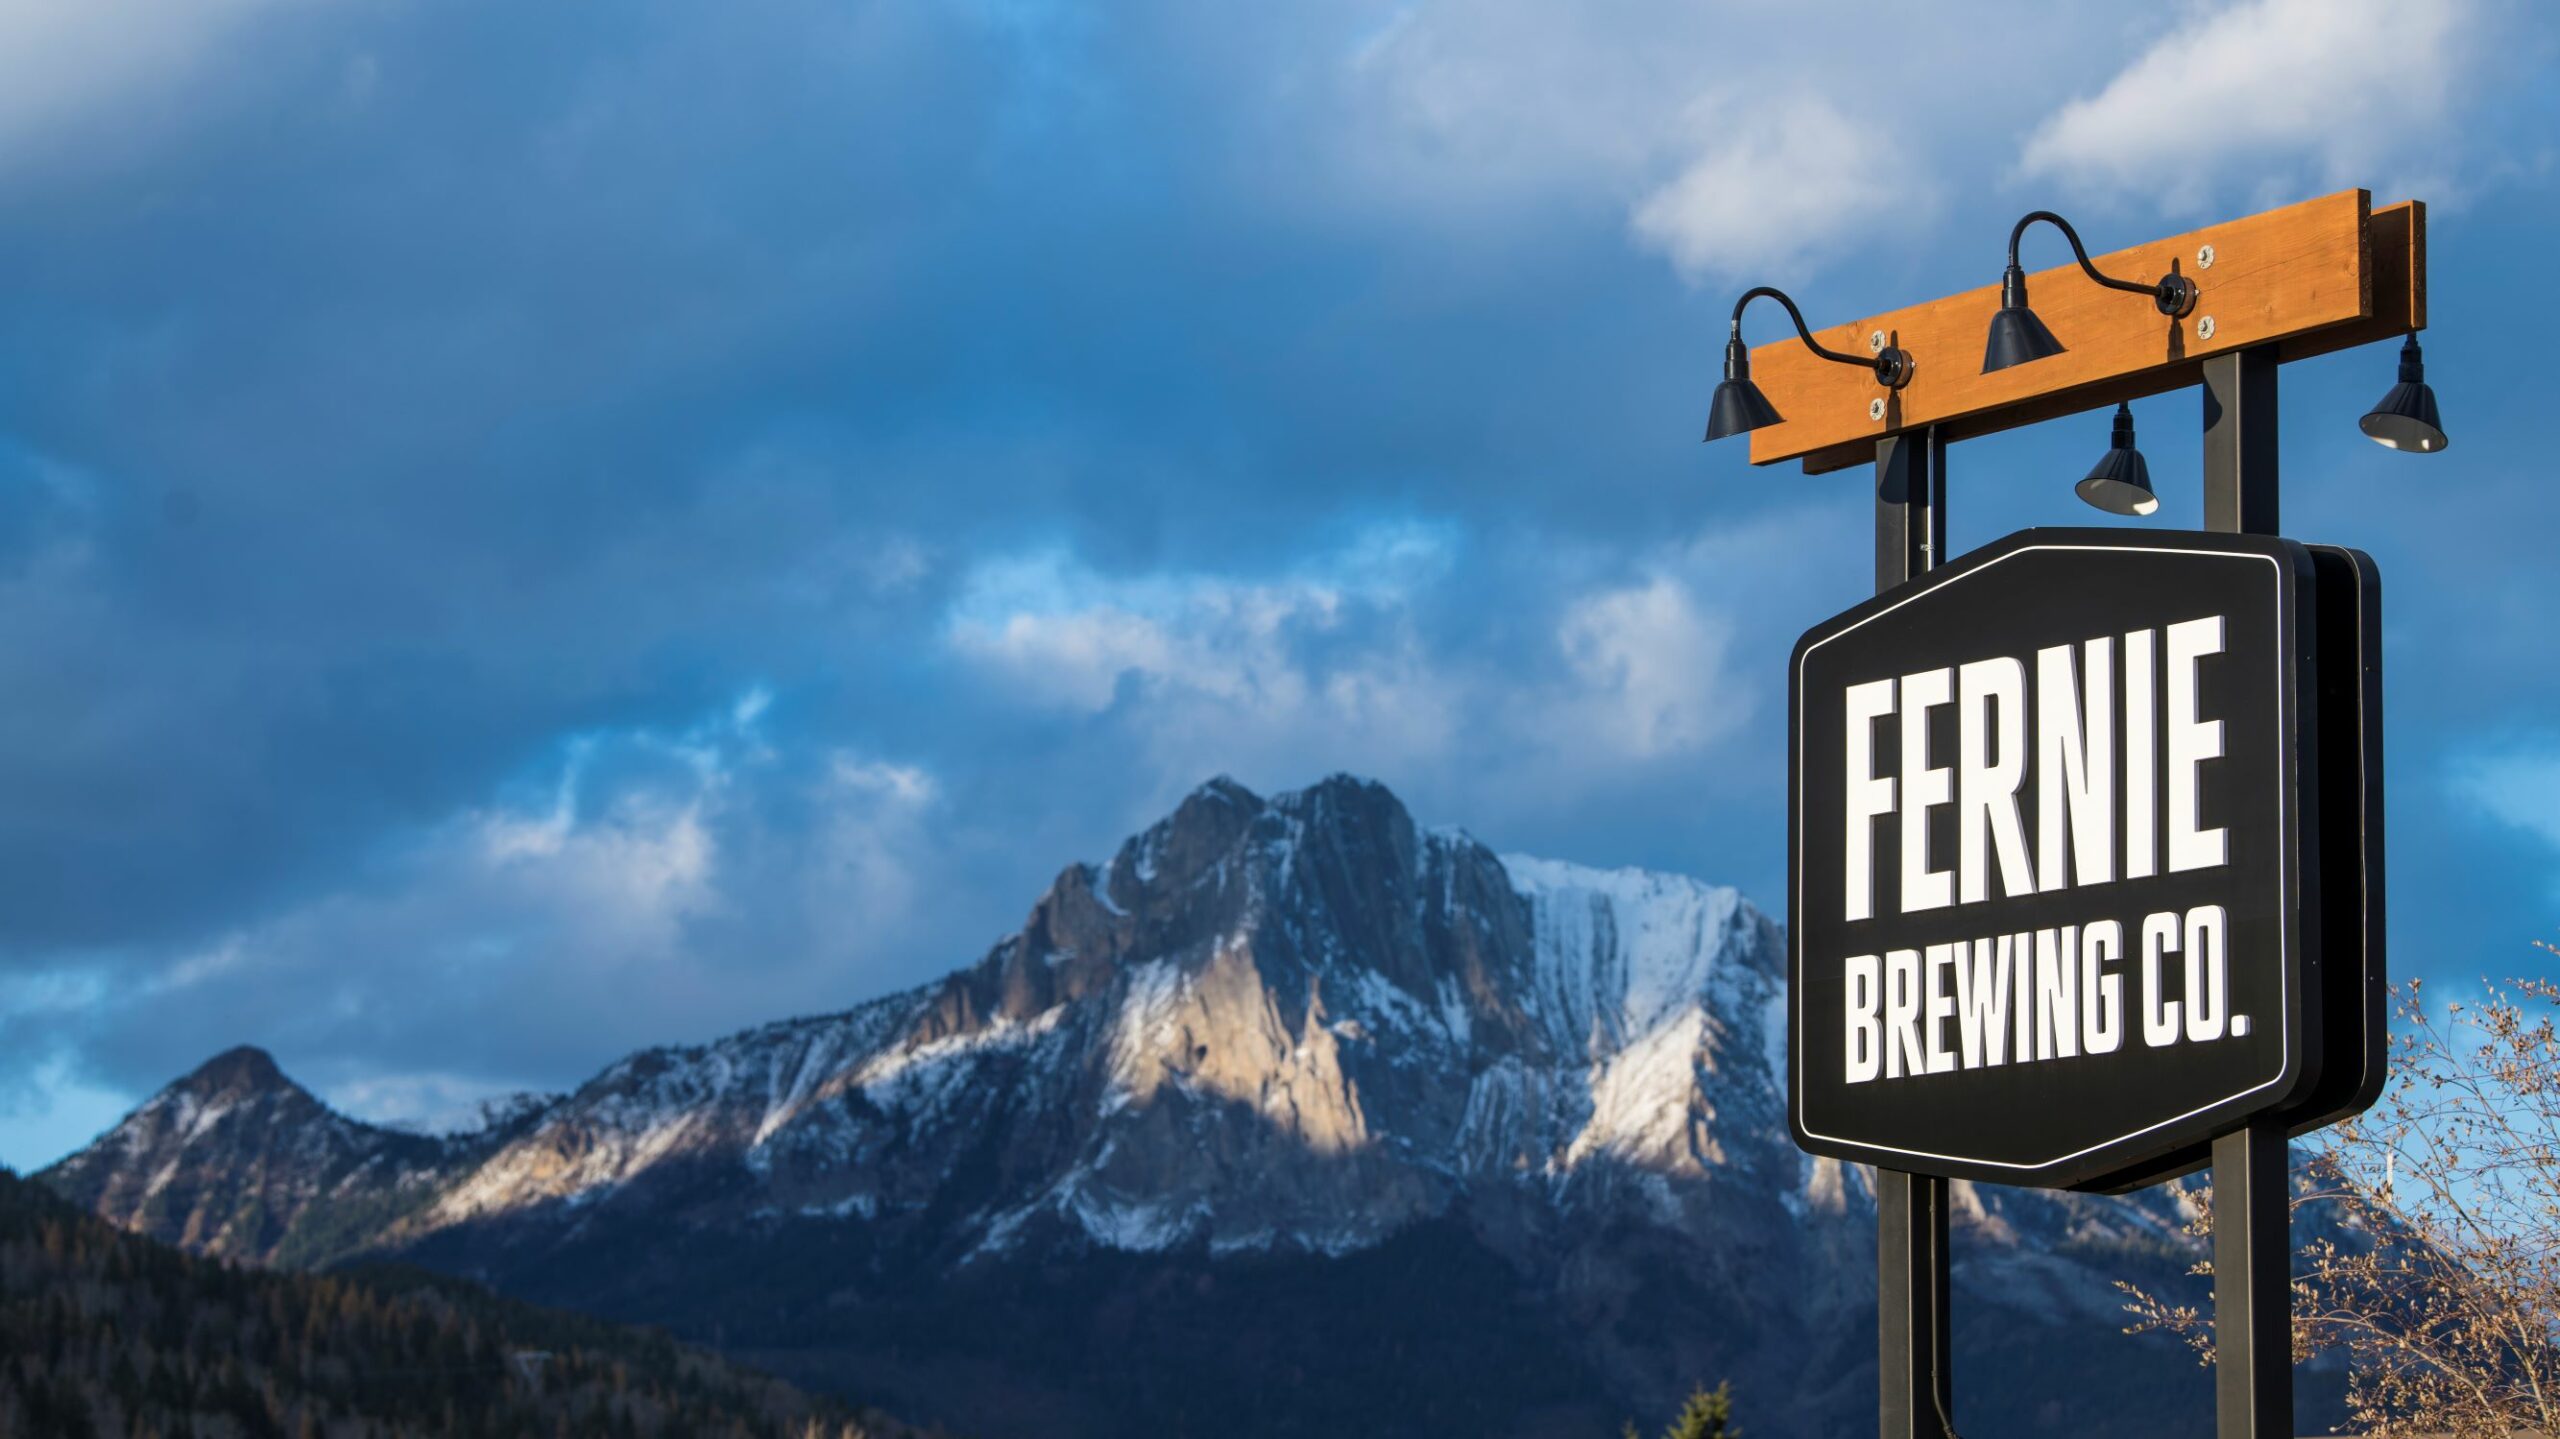 The Fernie Brewing Co. sign with a mountain in the background.